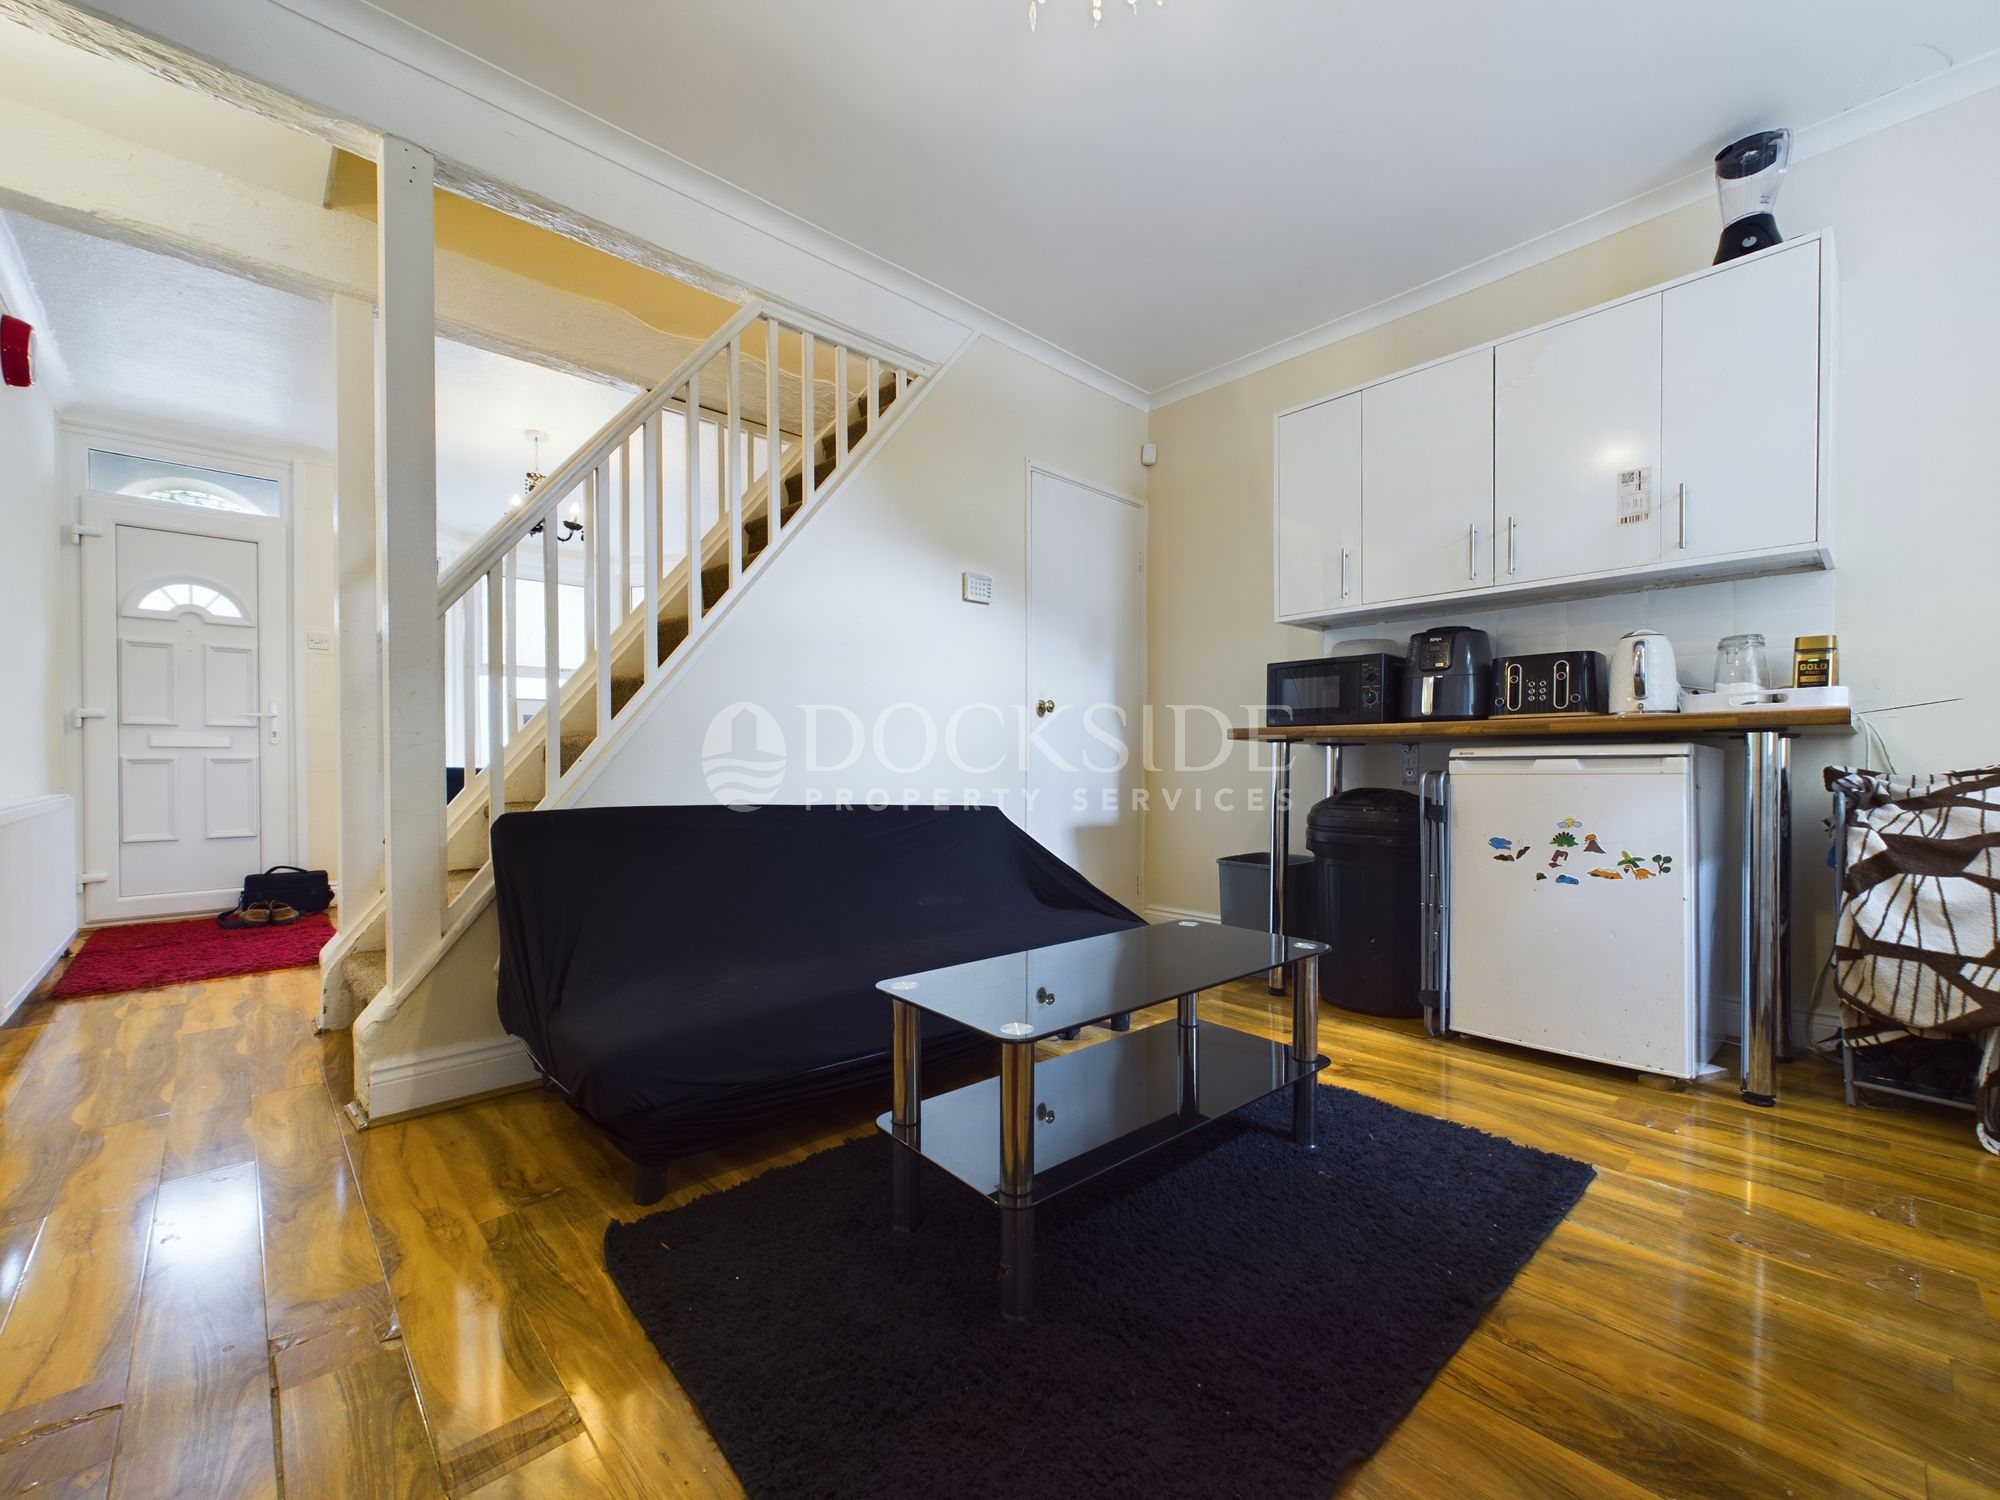 3 bed house to rent in Curzon Road, Chatham  - Property Image 2